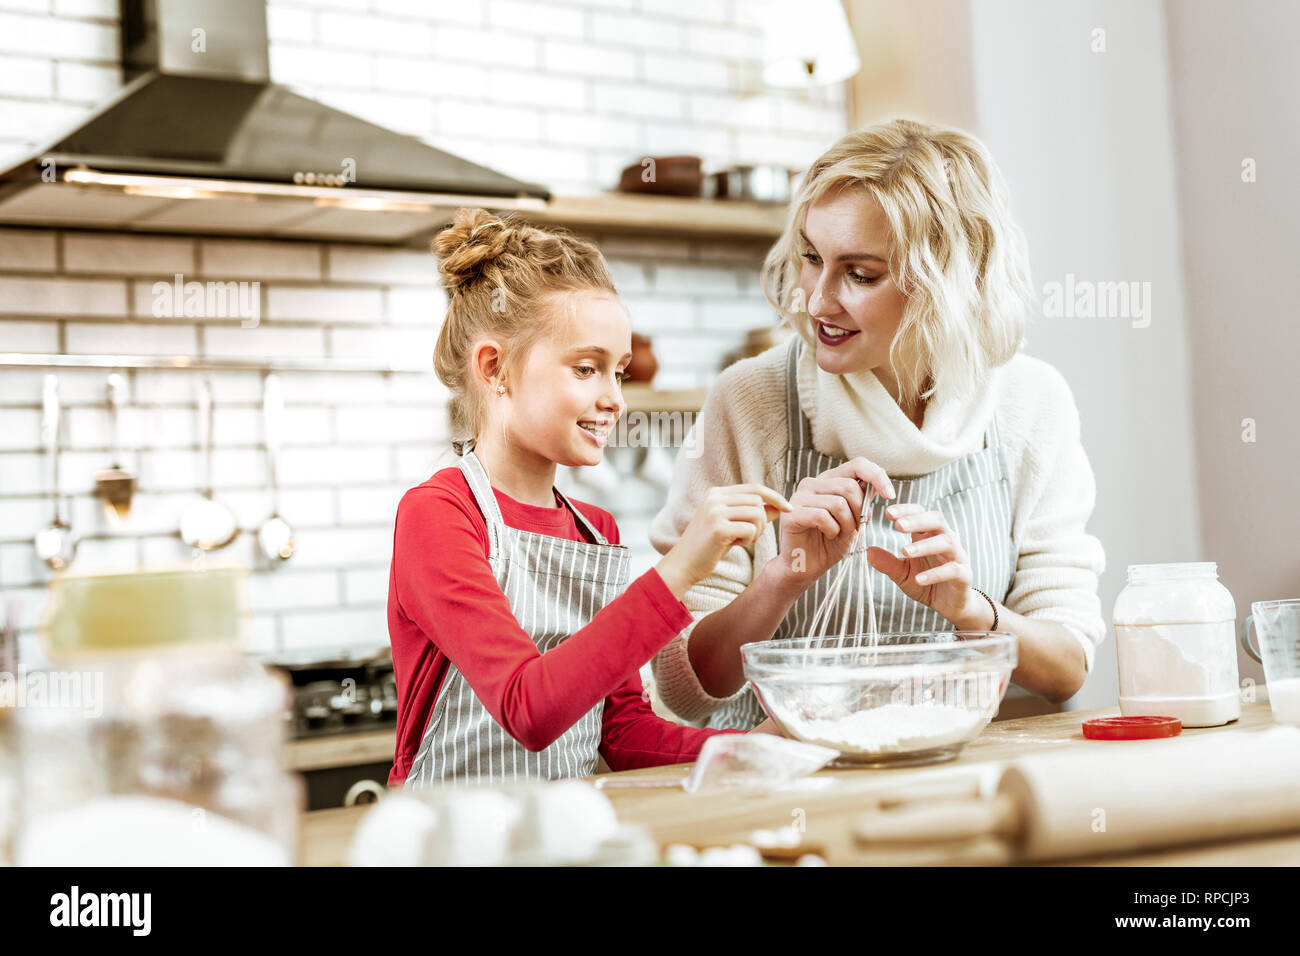 Smiling little kid in red dress asking about baking process Stock Photo